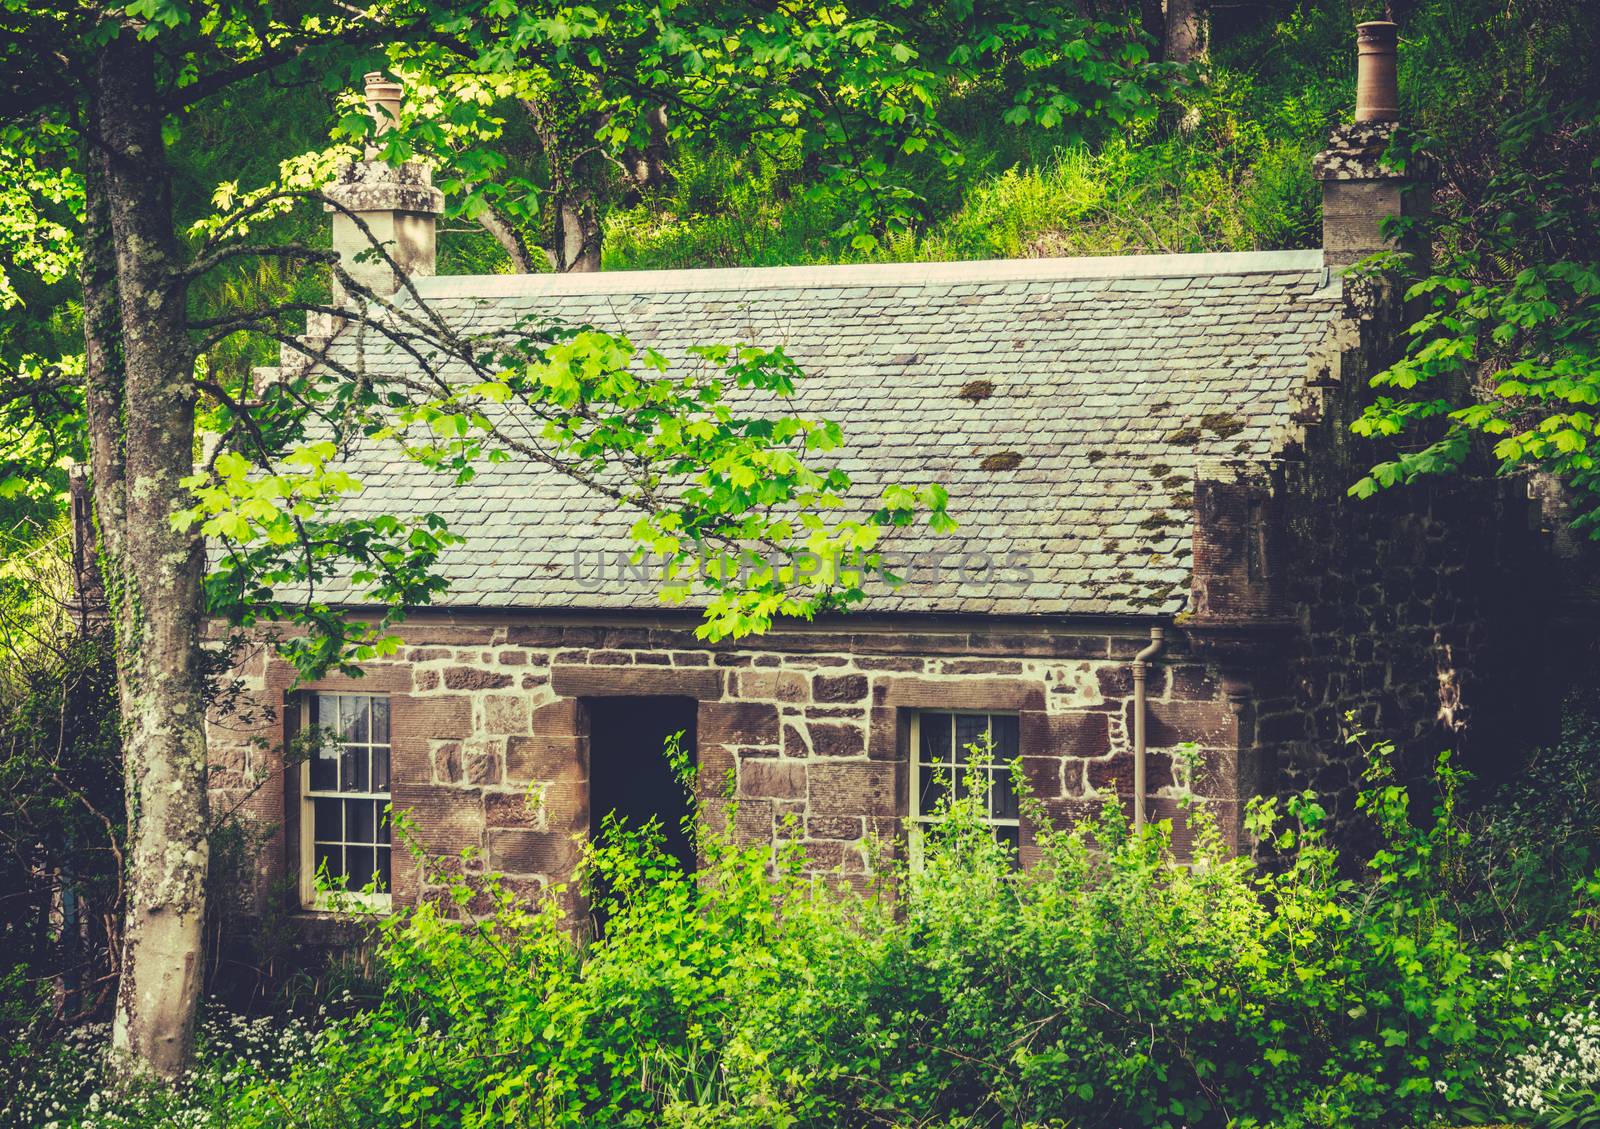 A Small Ancient Cottage Or House Hidden In The Woods